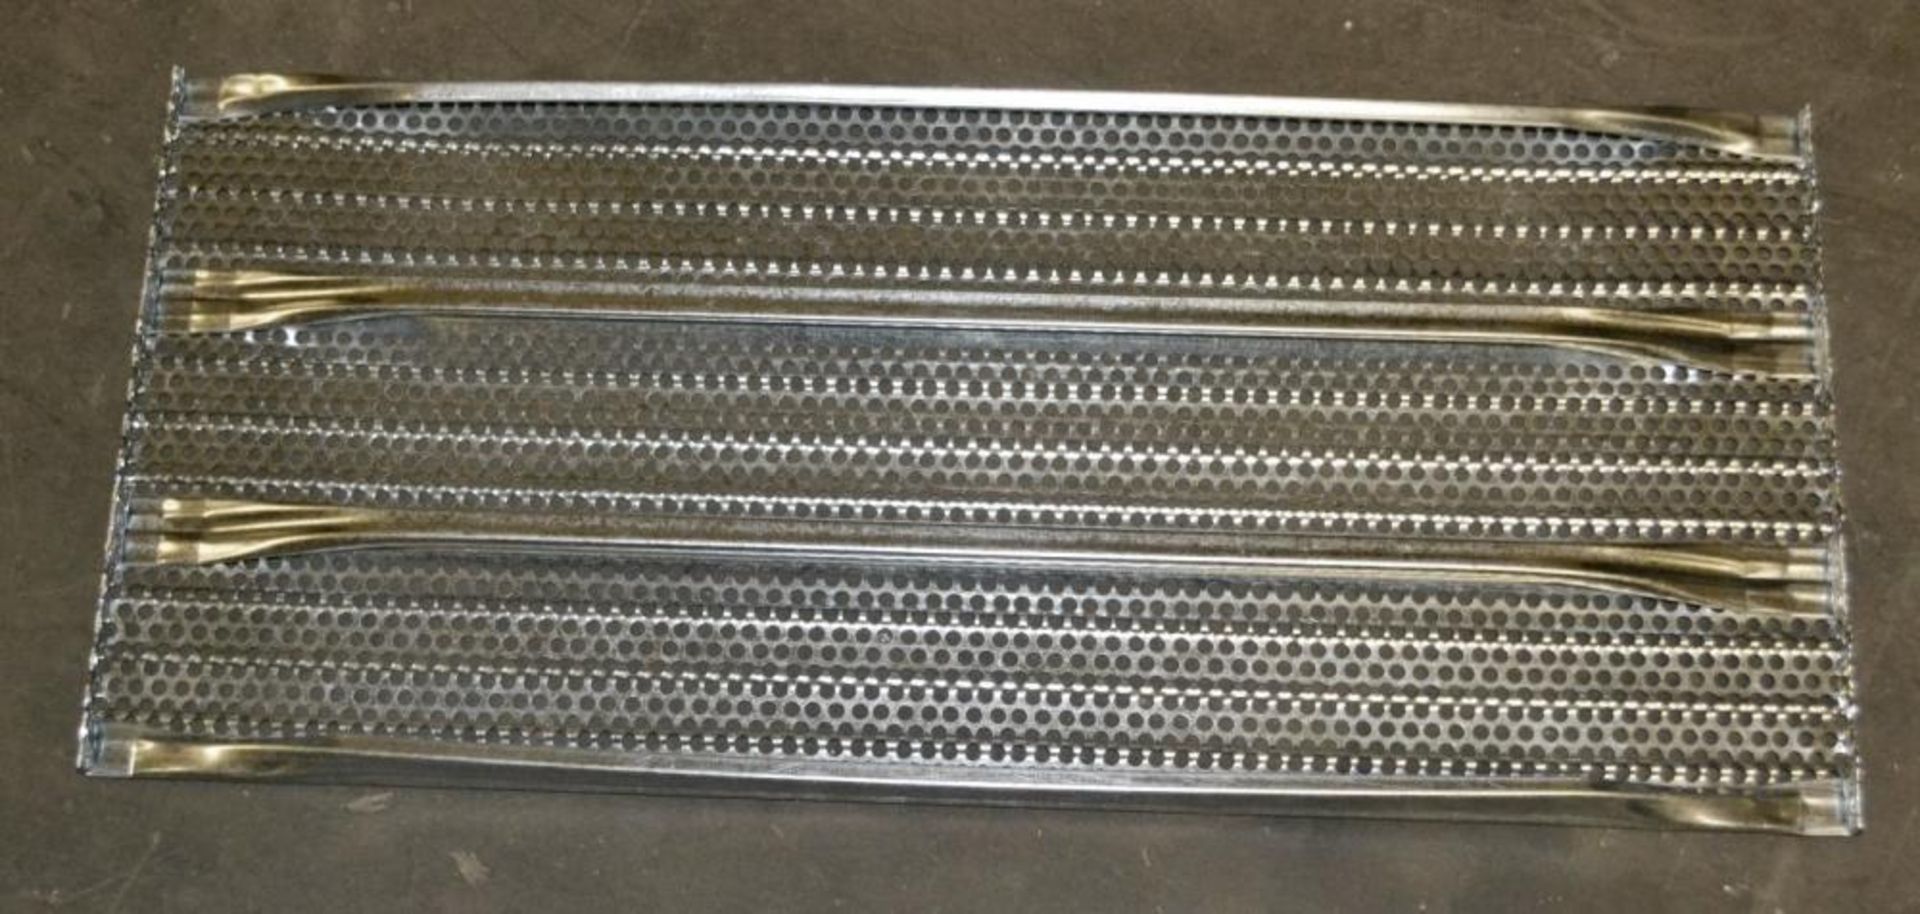 13 x Bays of Metalsistem Steel Modular Storage Shelving - Includes 28 Pieces - Recently Removed - Image 12 of 18